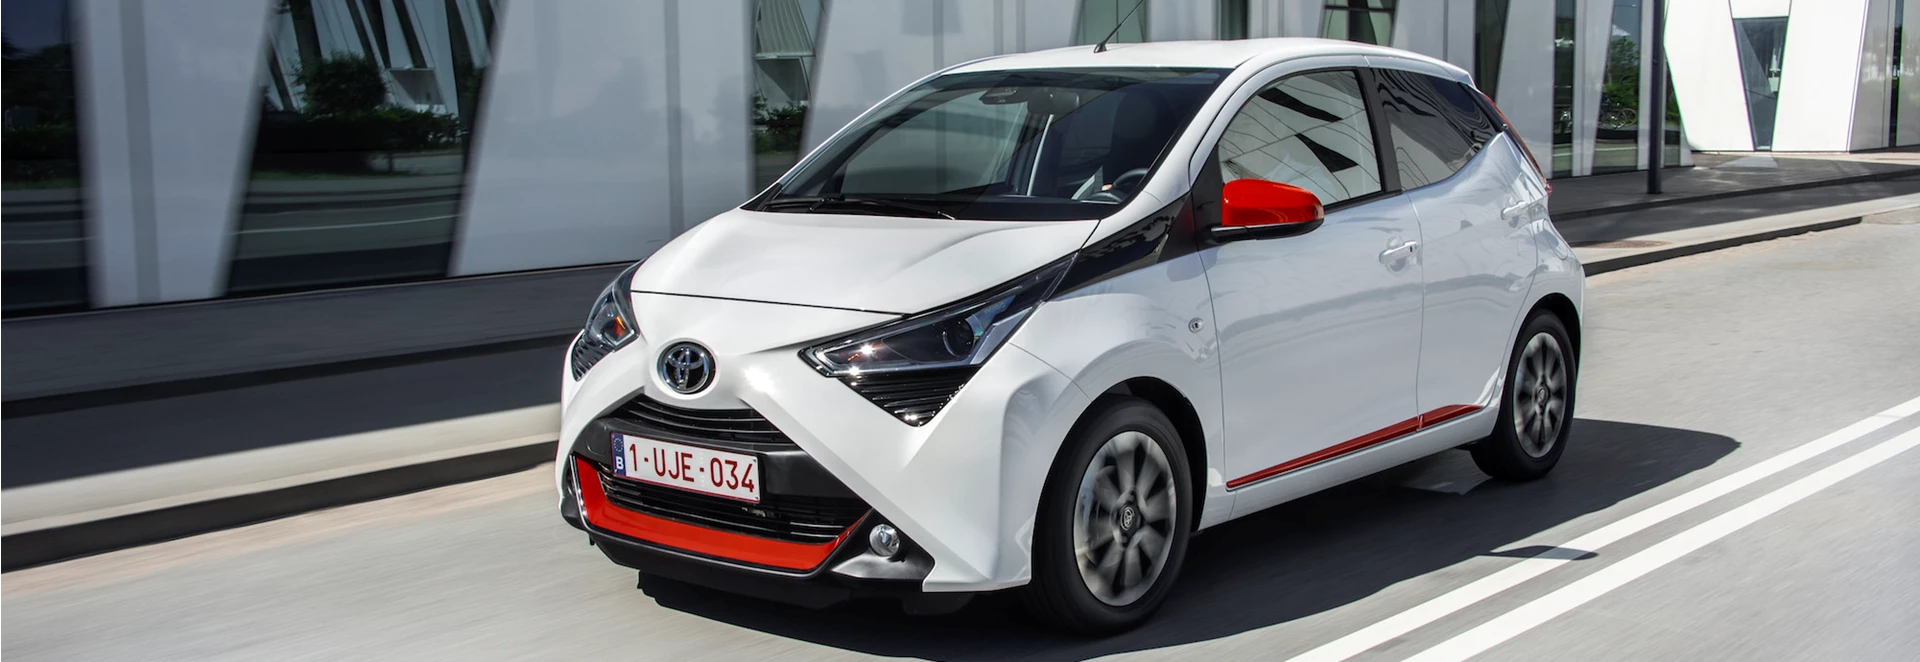 All you need to know about the new Toyota Aygo x-cite